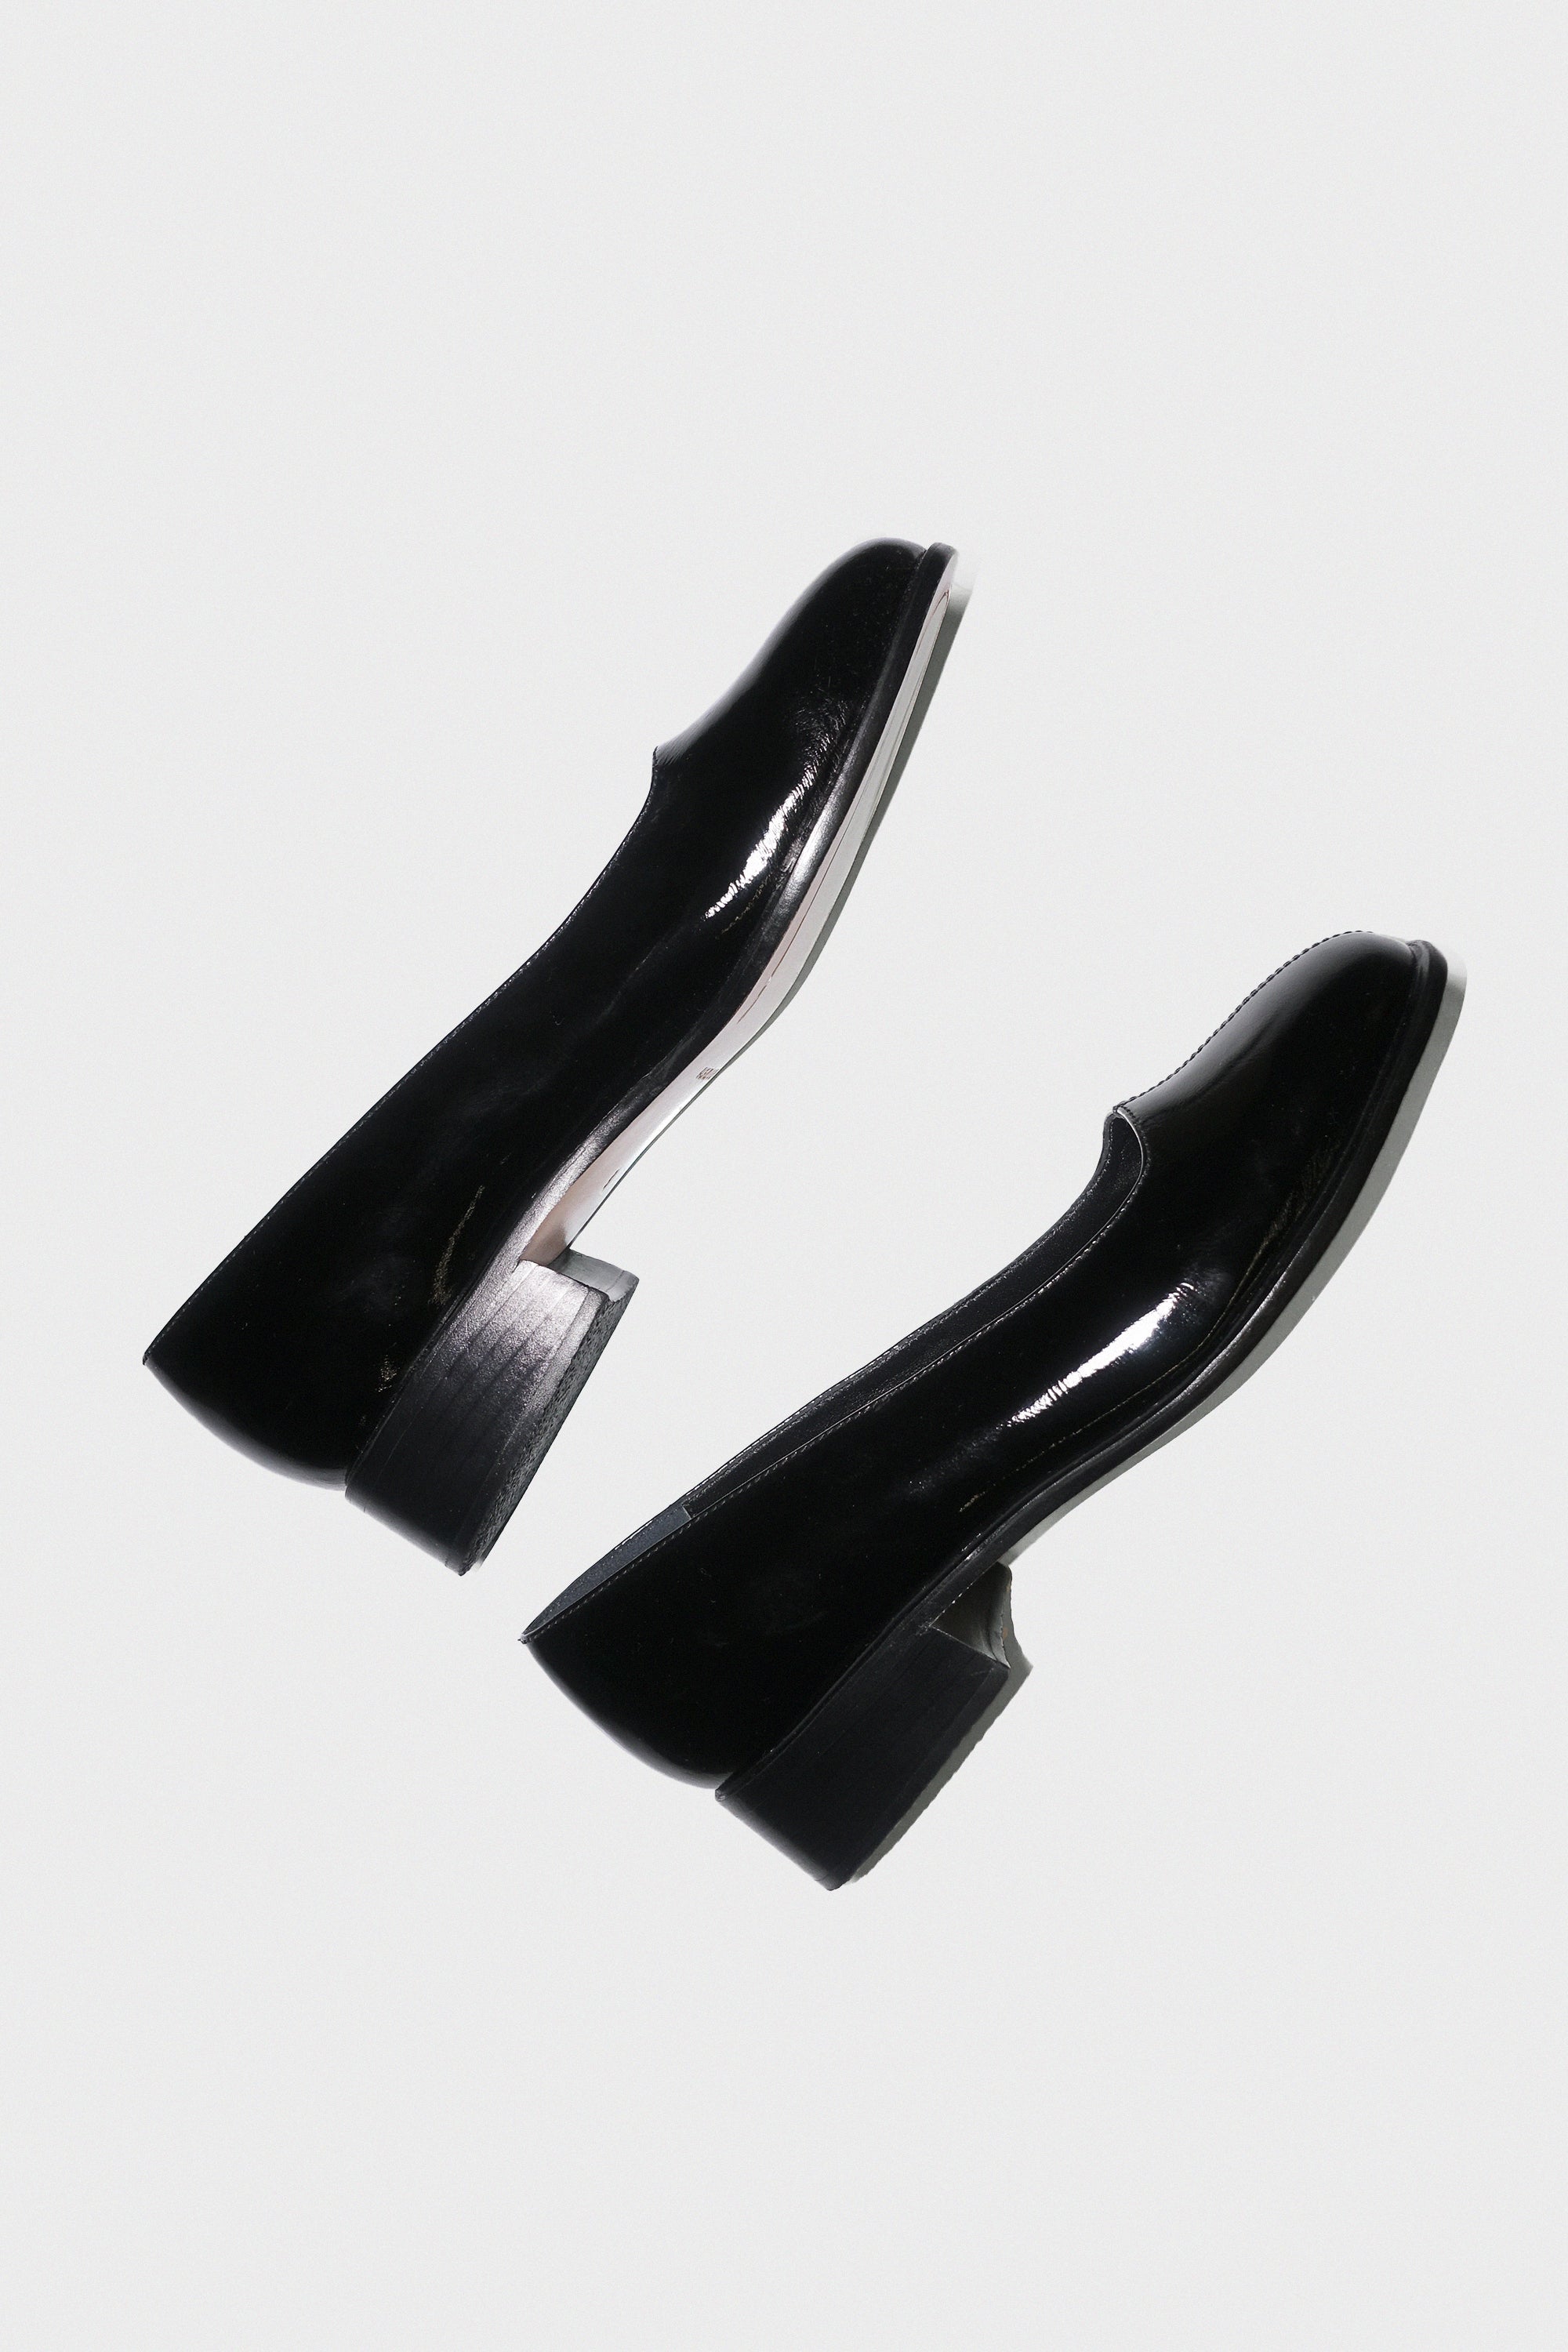 Smoking Sugar Loafer in Black Patent Leather by Rachel Comey